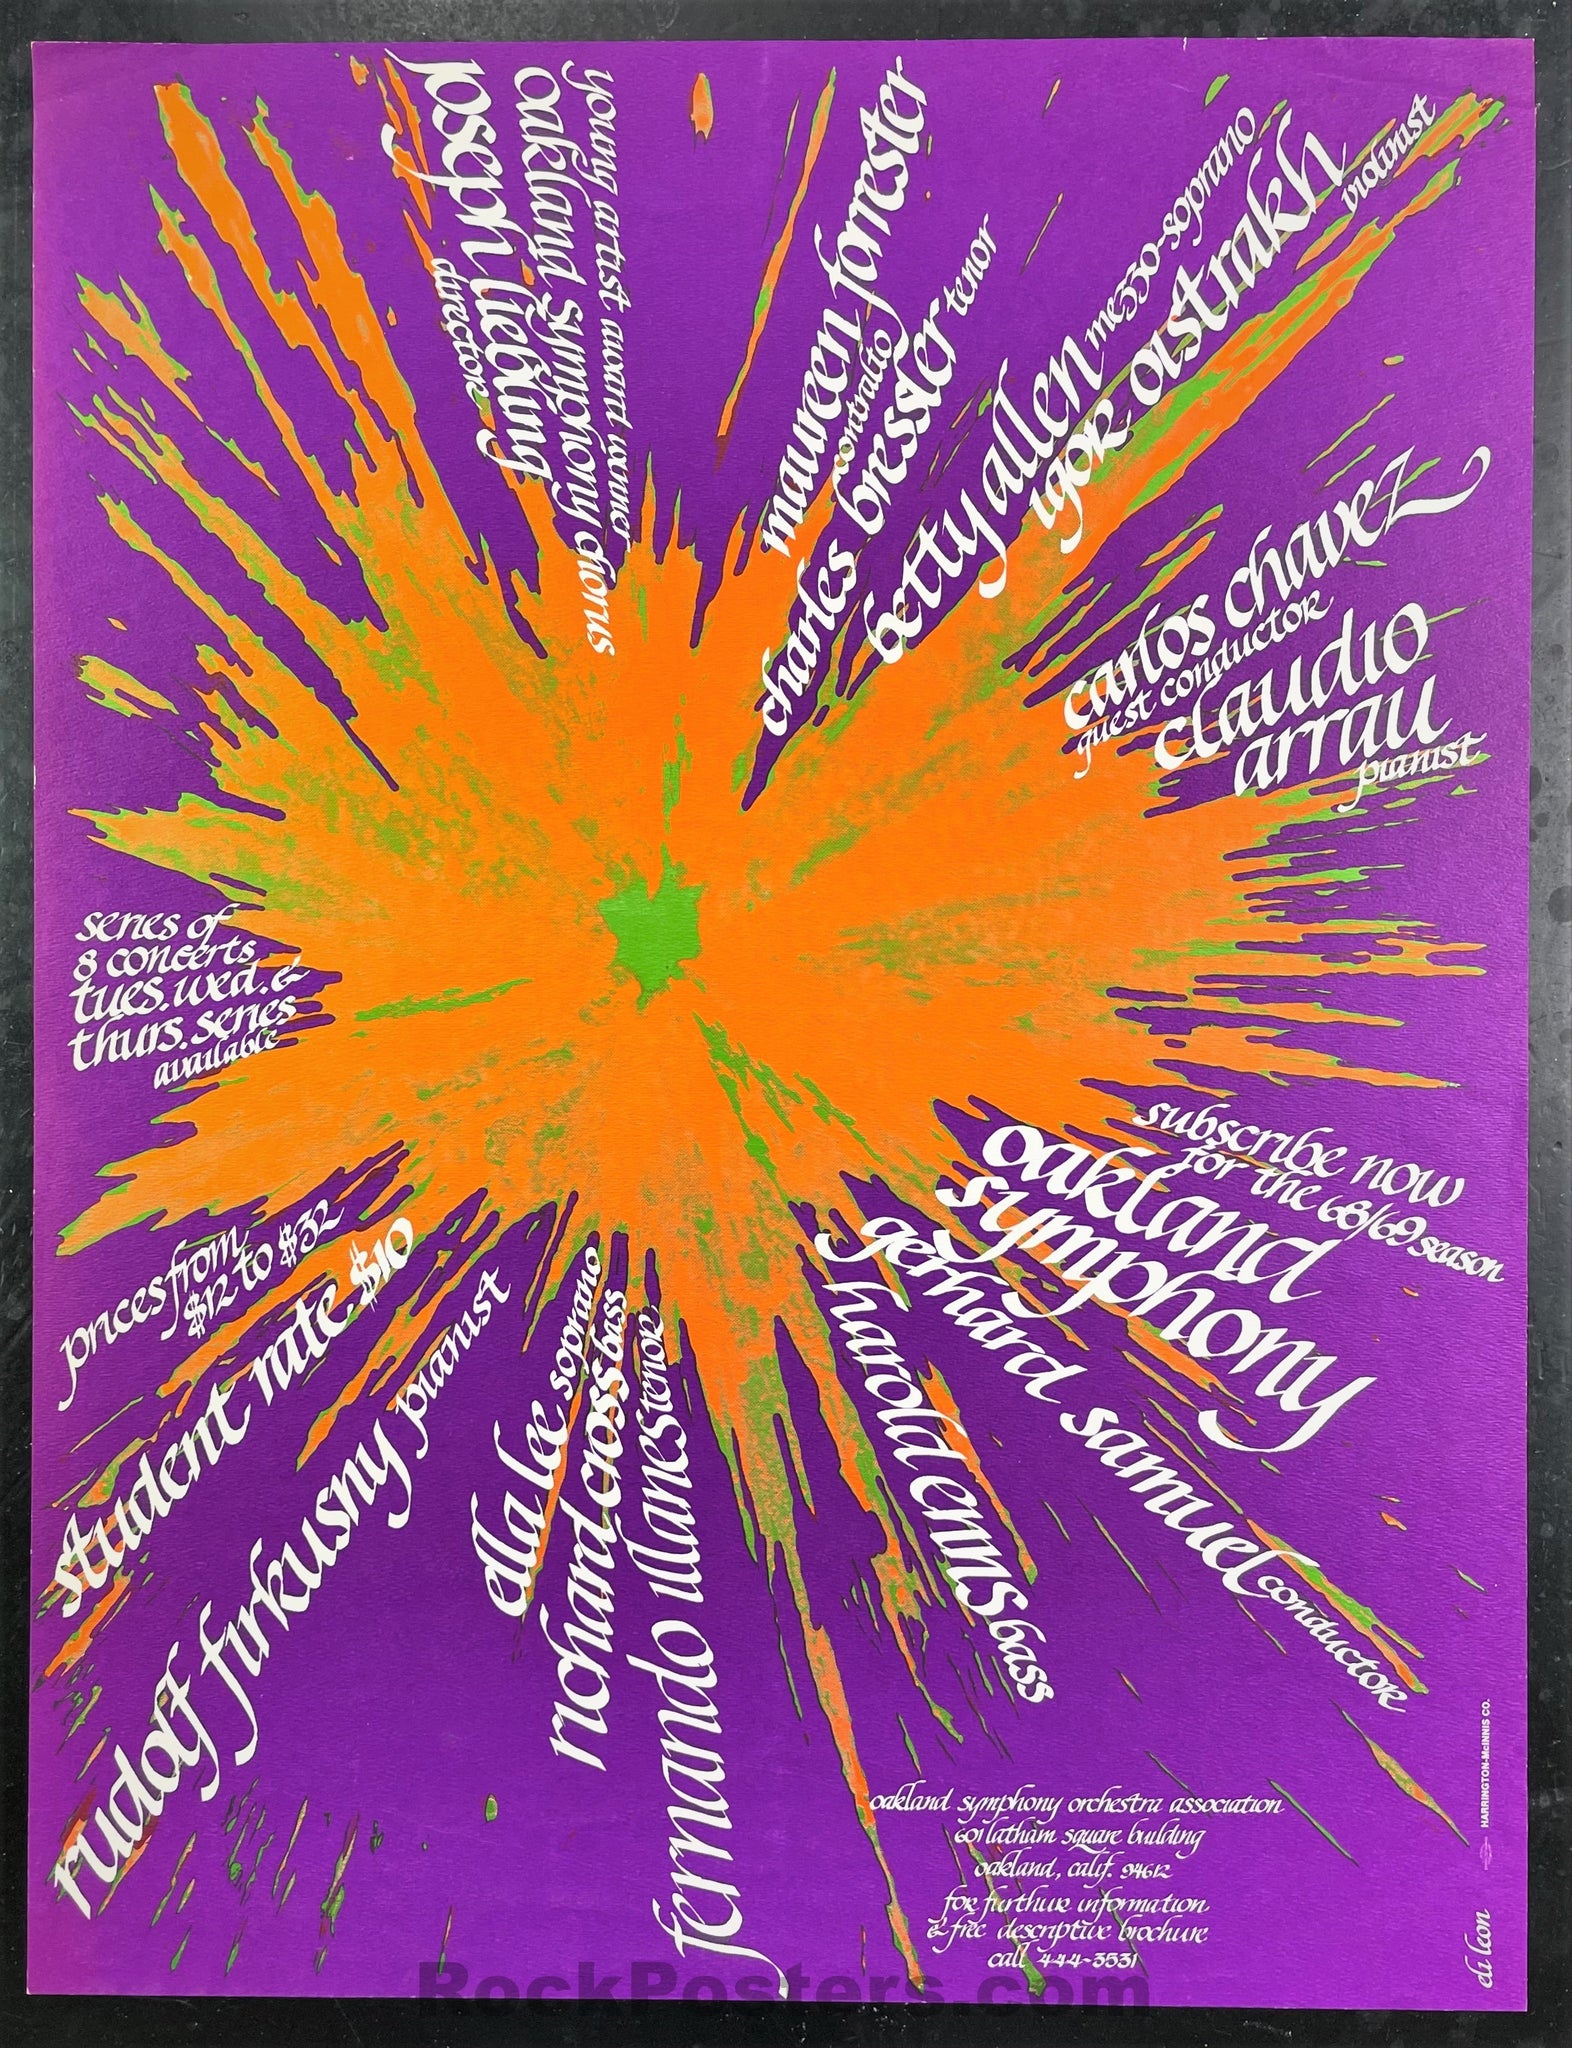 AUCTION - Psychedelic - Oakland Symphony Schedule - 1968/69 Poster - Near Mint Minus